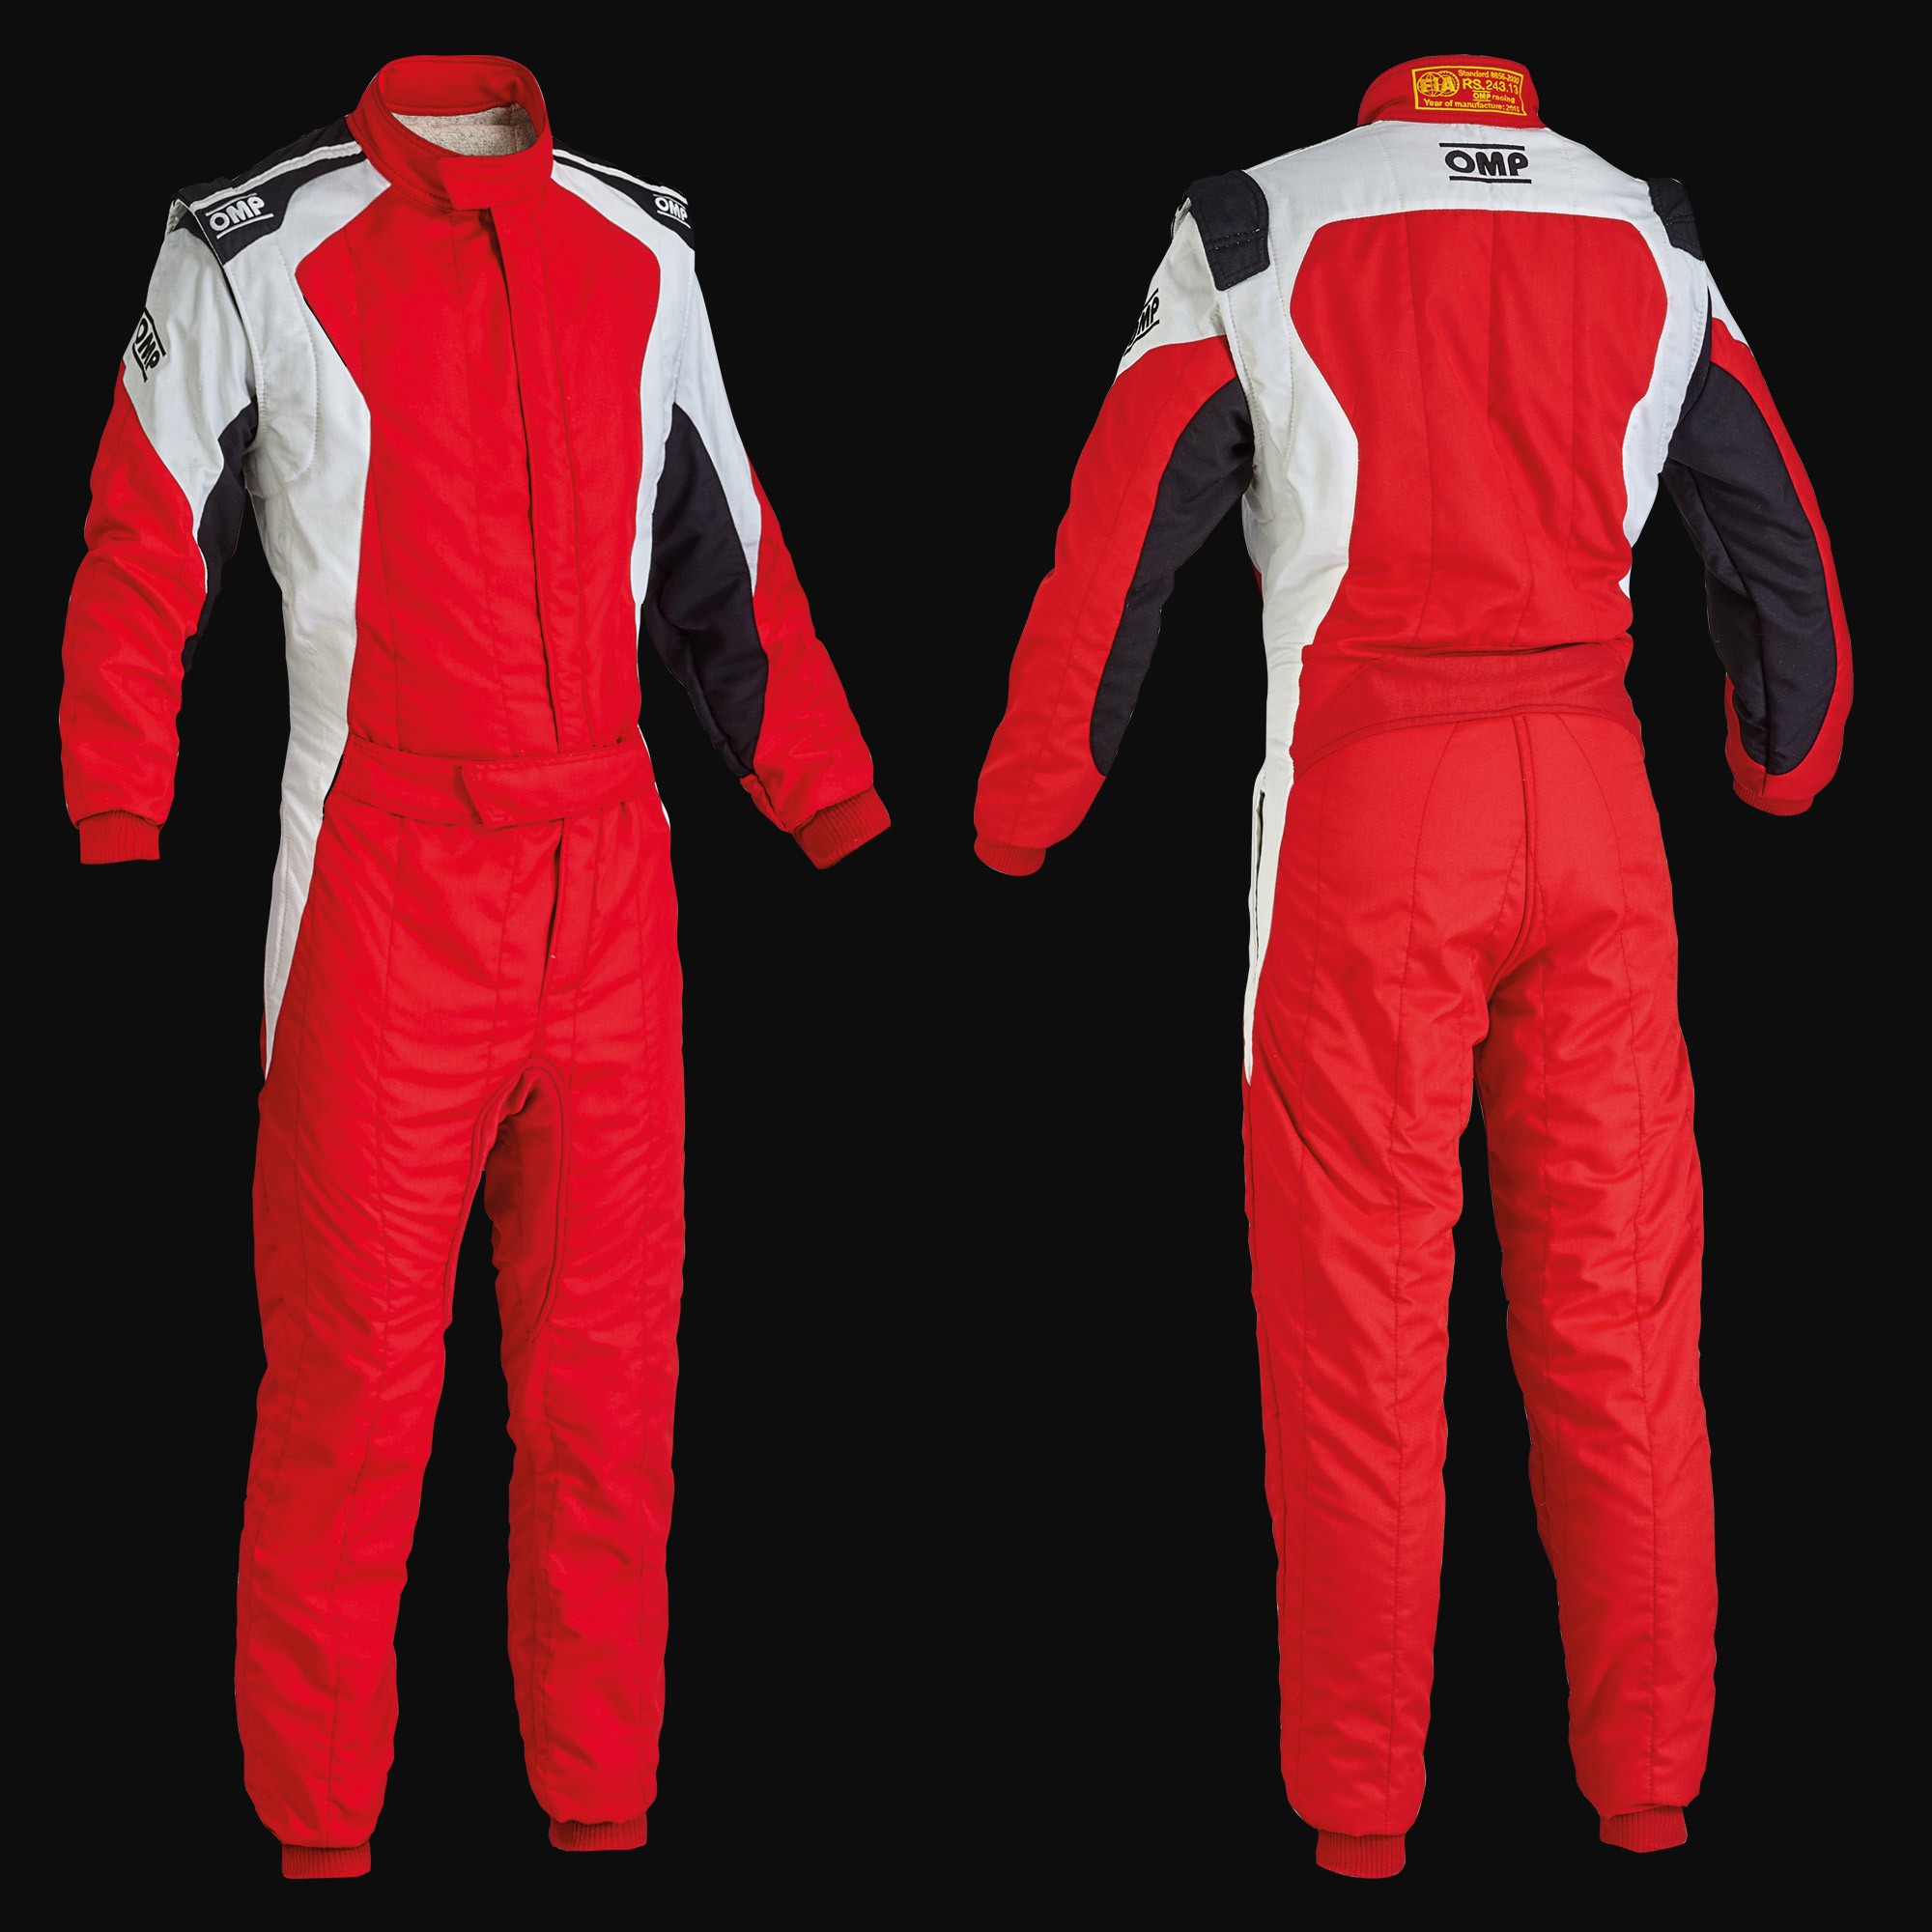 FIRST EVO SUIT MY 2016 - Racing suit | OMP Racing